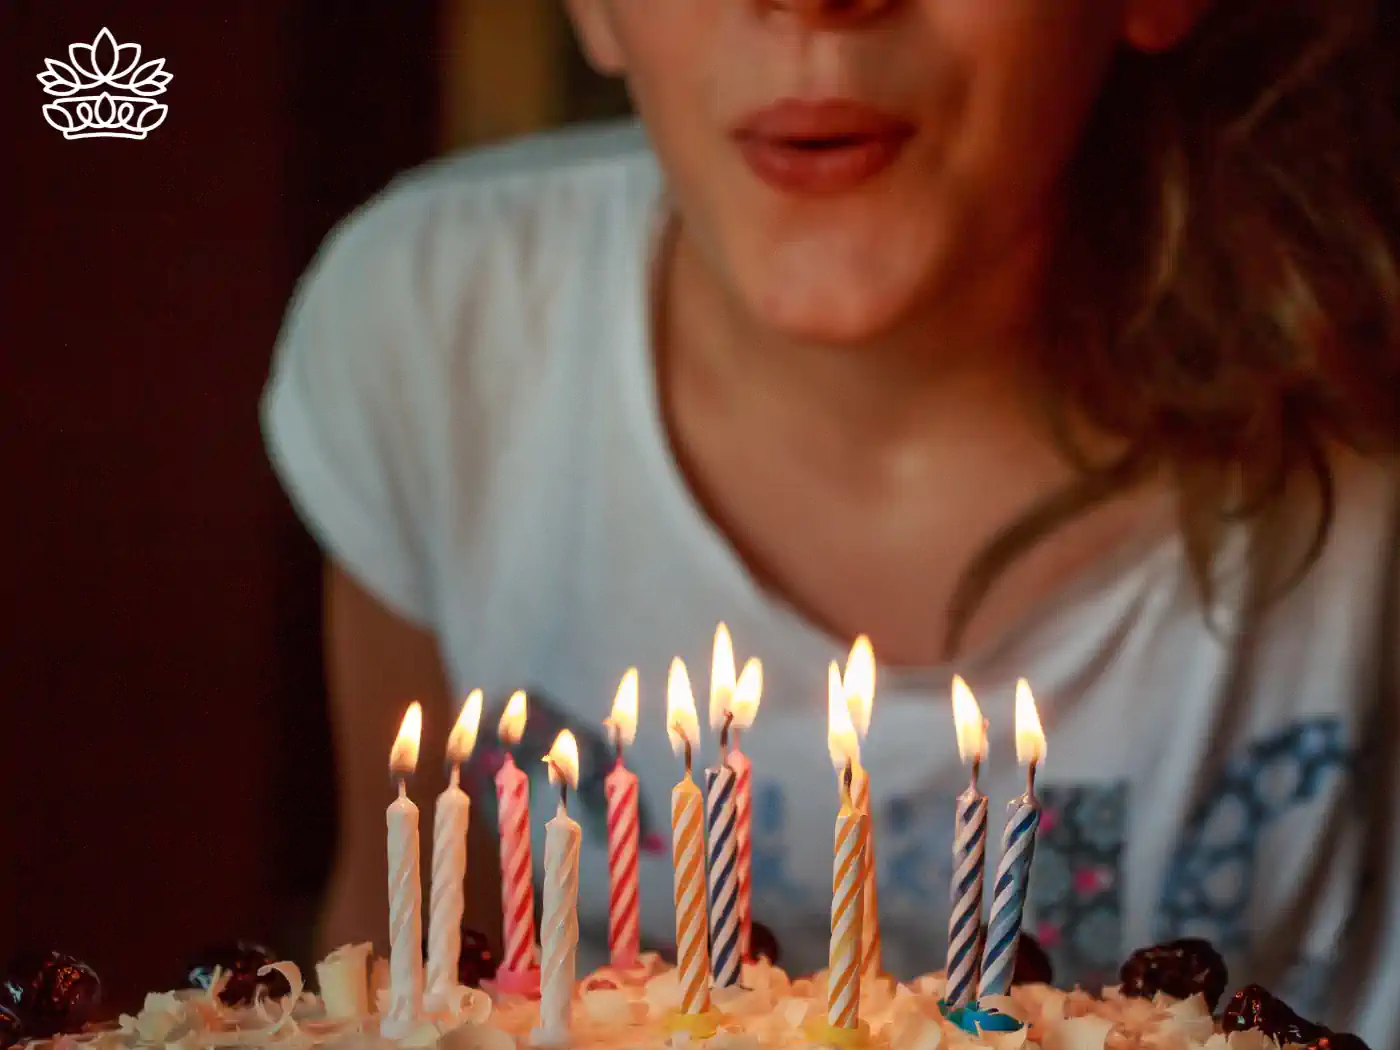 Close-up of a person blowing out candles on a birthday cake - Fabulous Flowers and Gifts, Sagittarius Flowers and Gifts